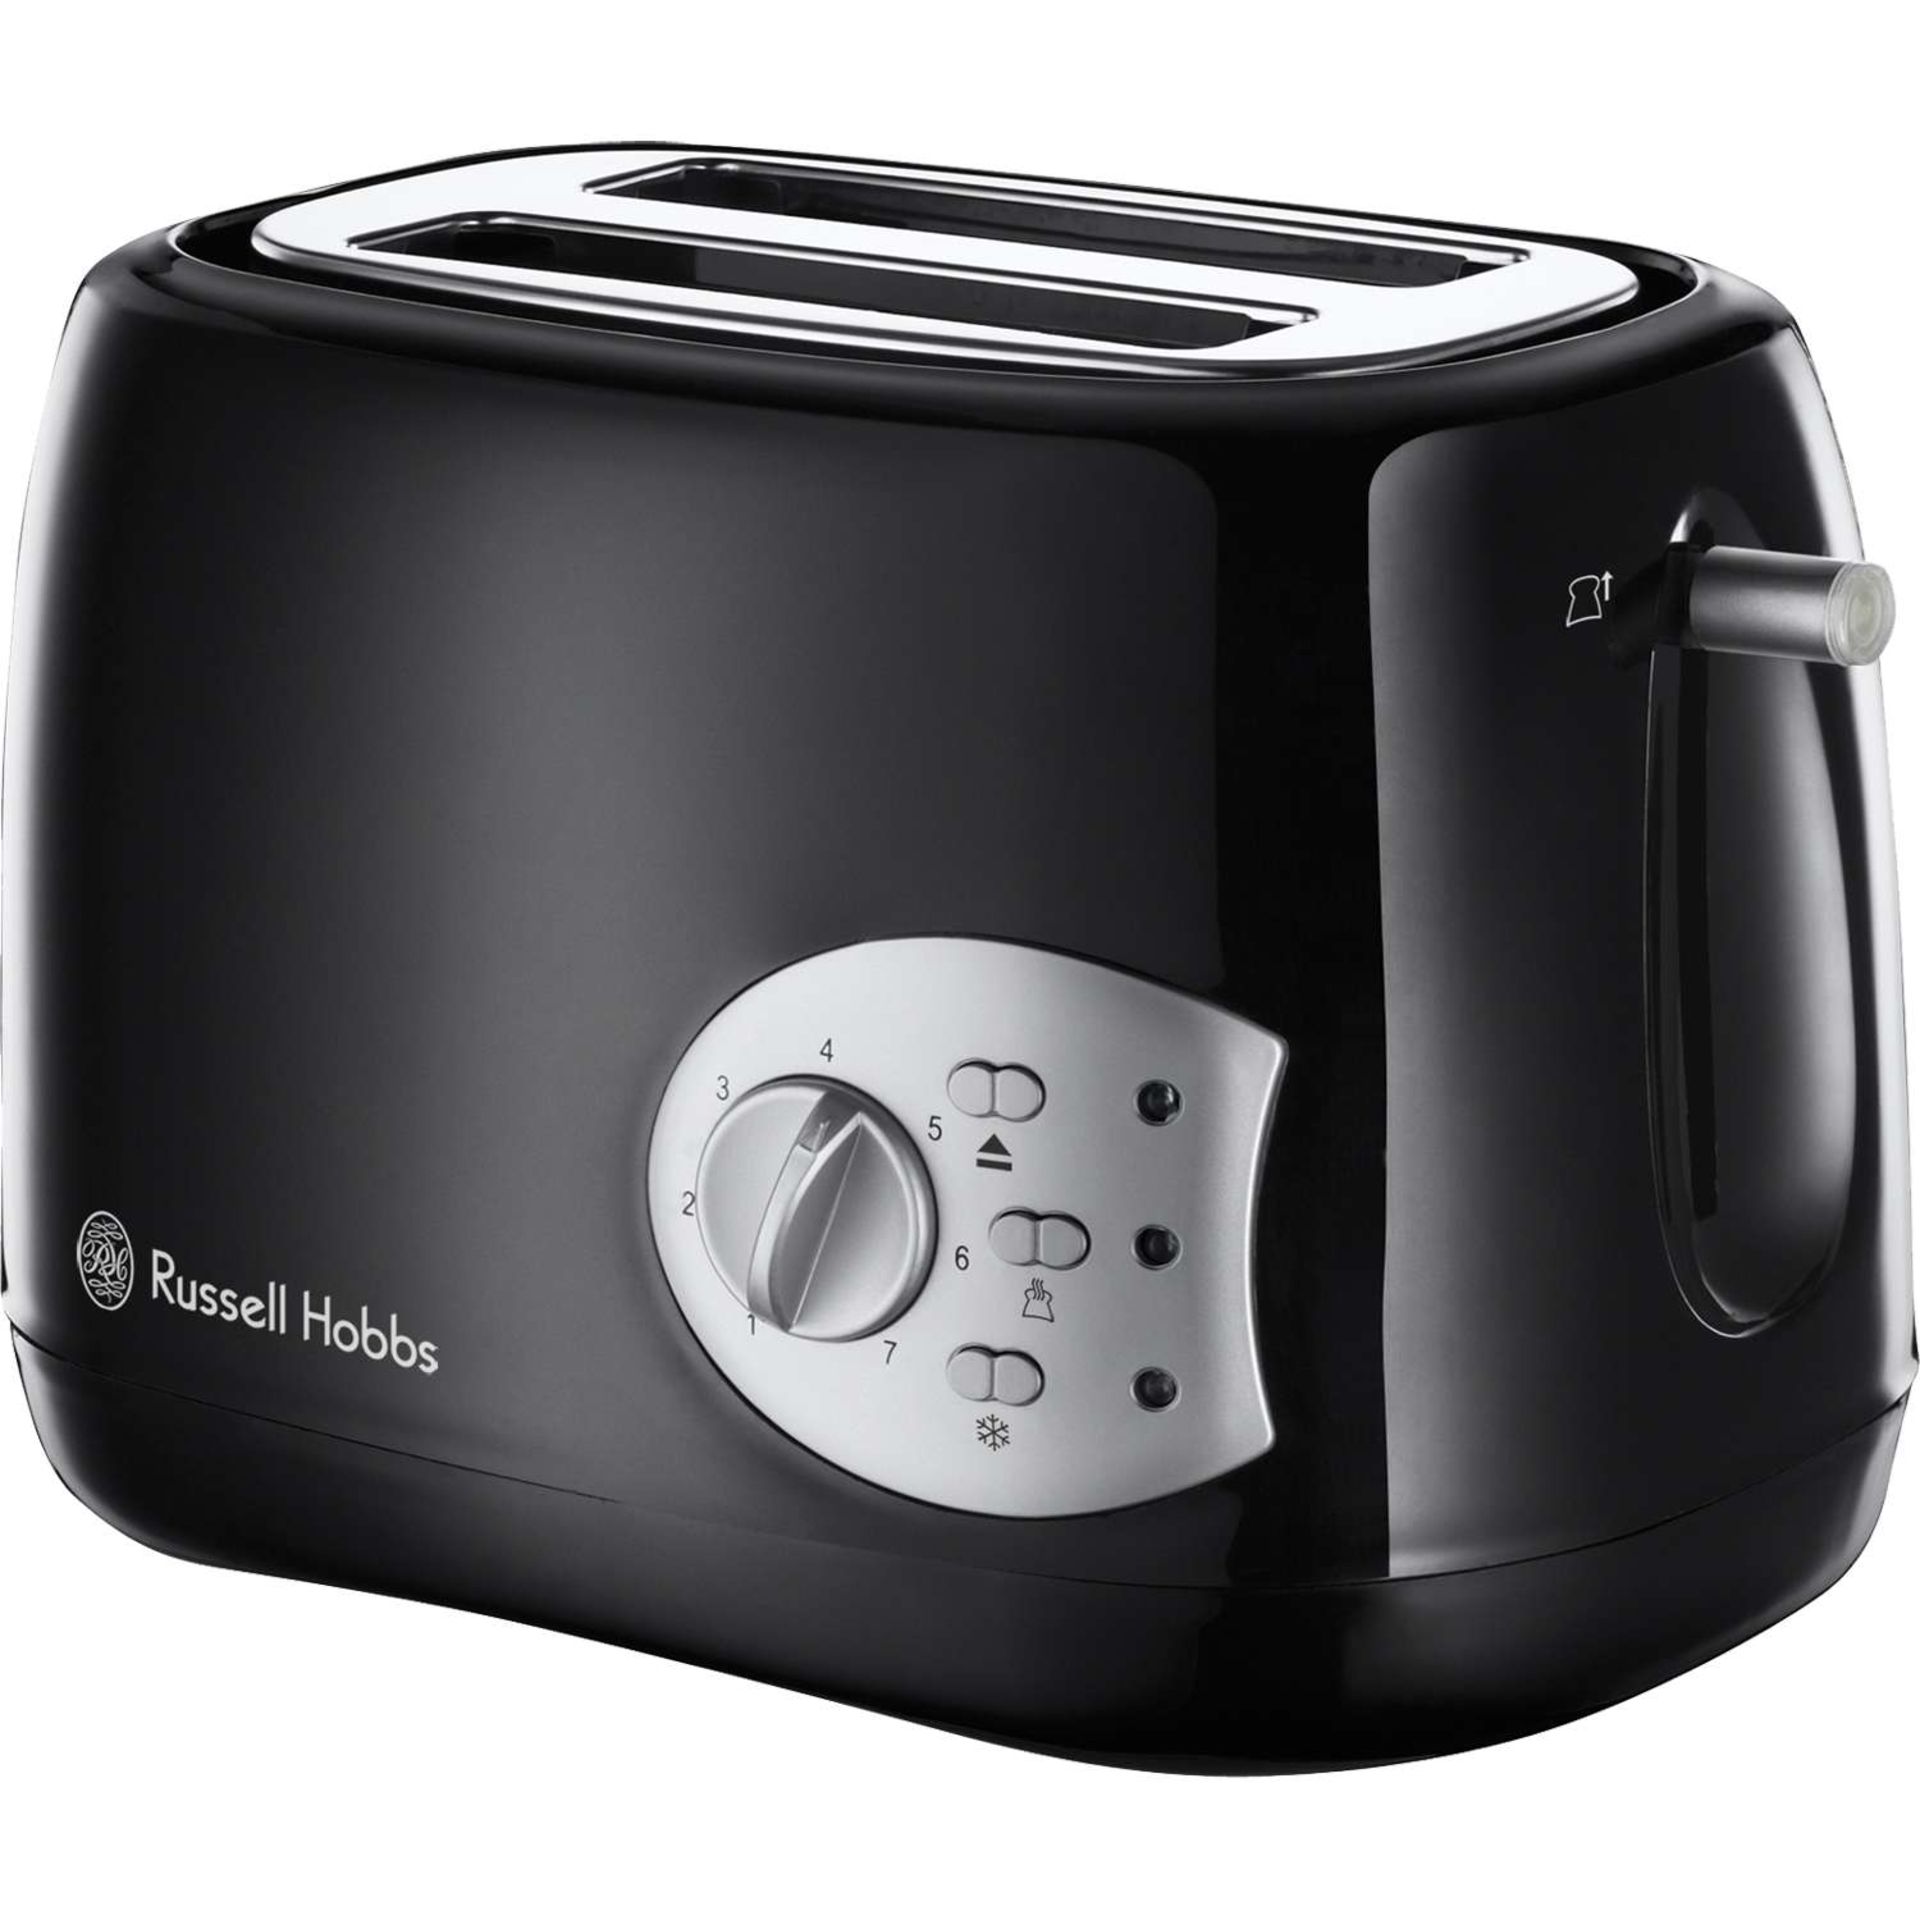 V *TRADE QTY* Brand New Russell Hobbs Two Slice Toaster - With Reheat/Frozen/Cancel Features -